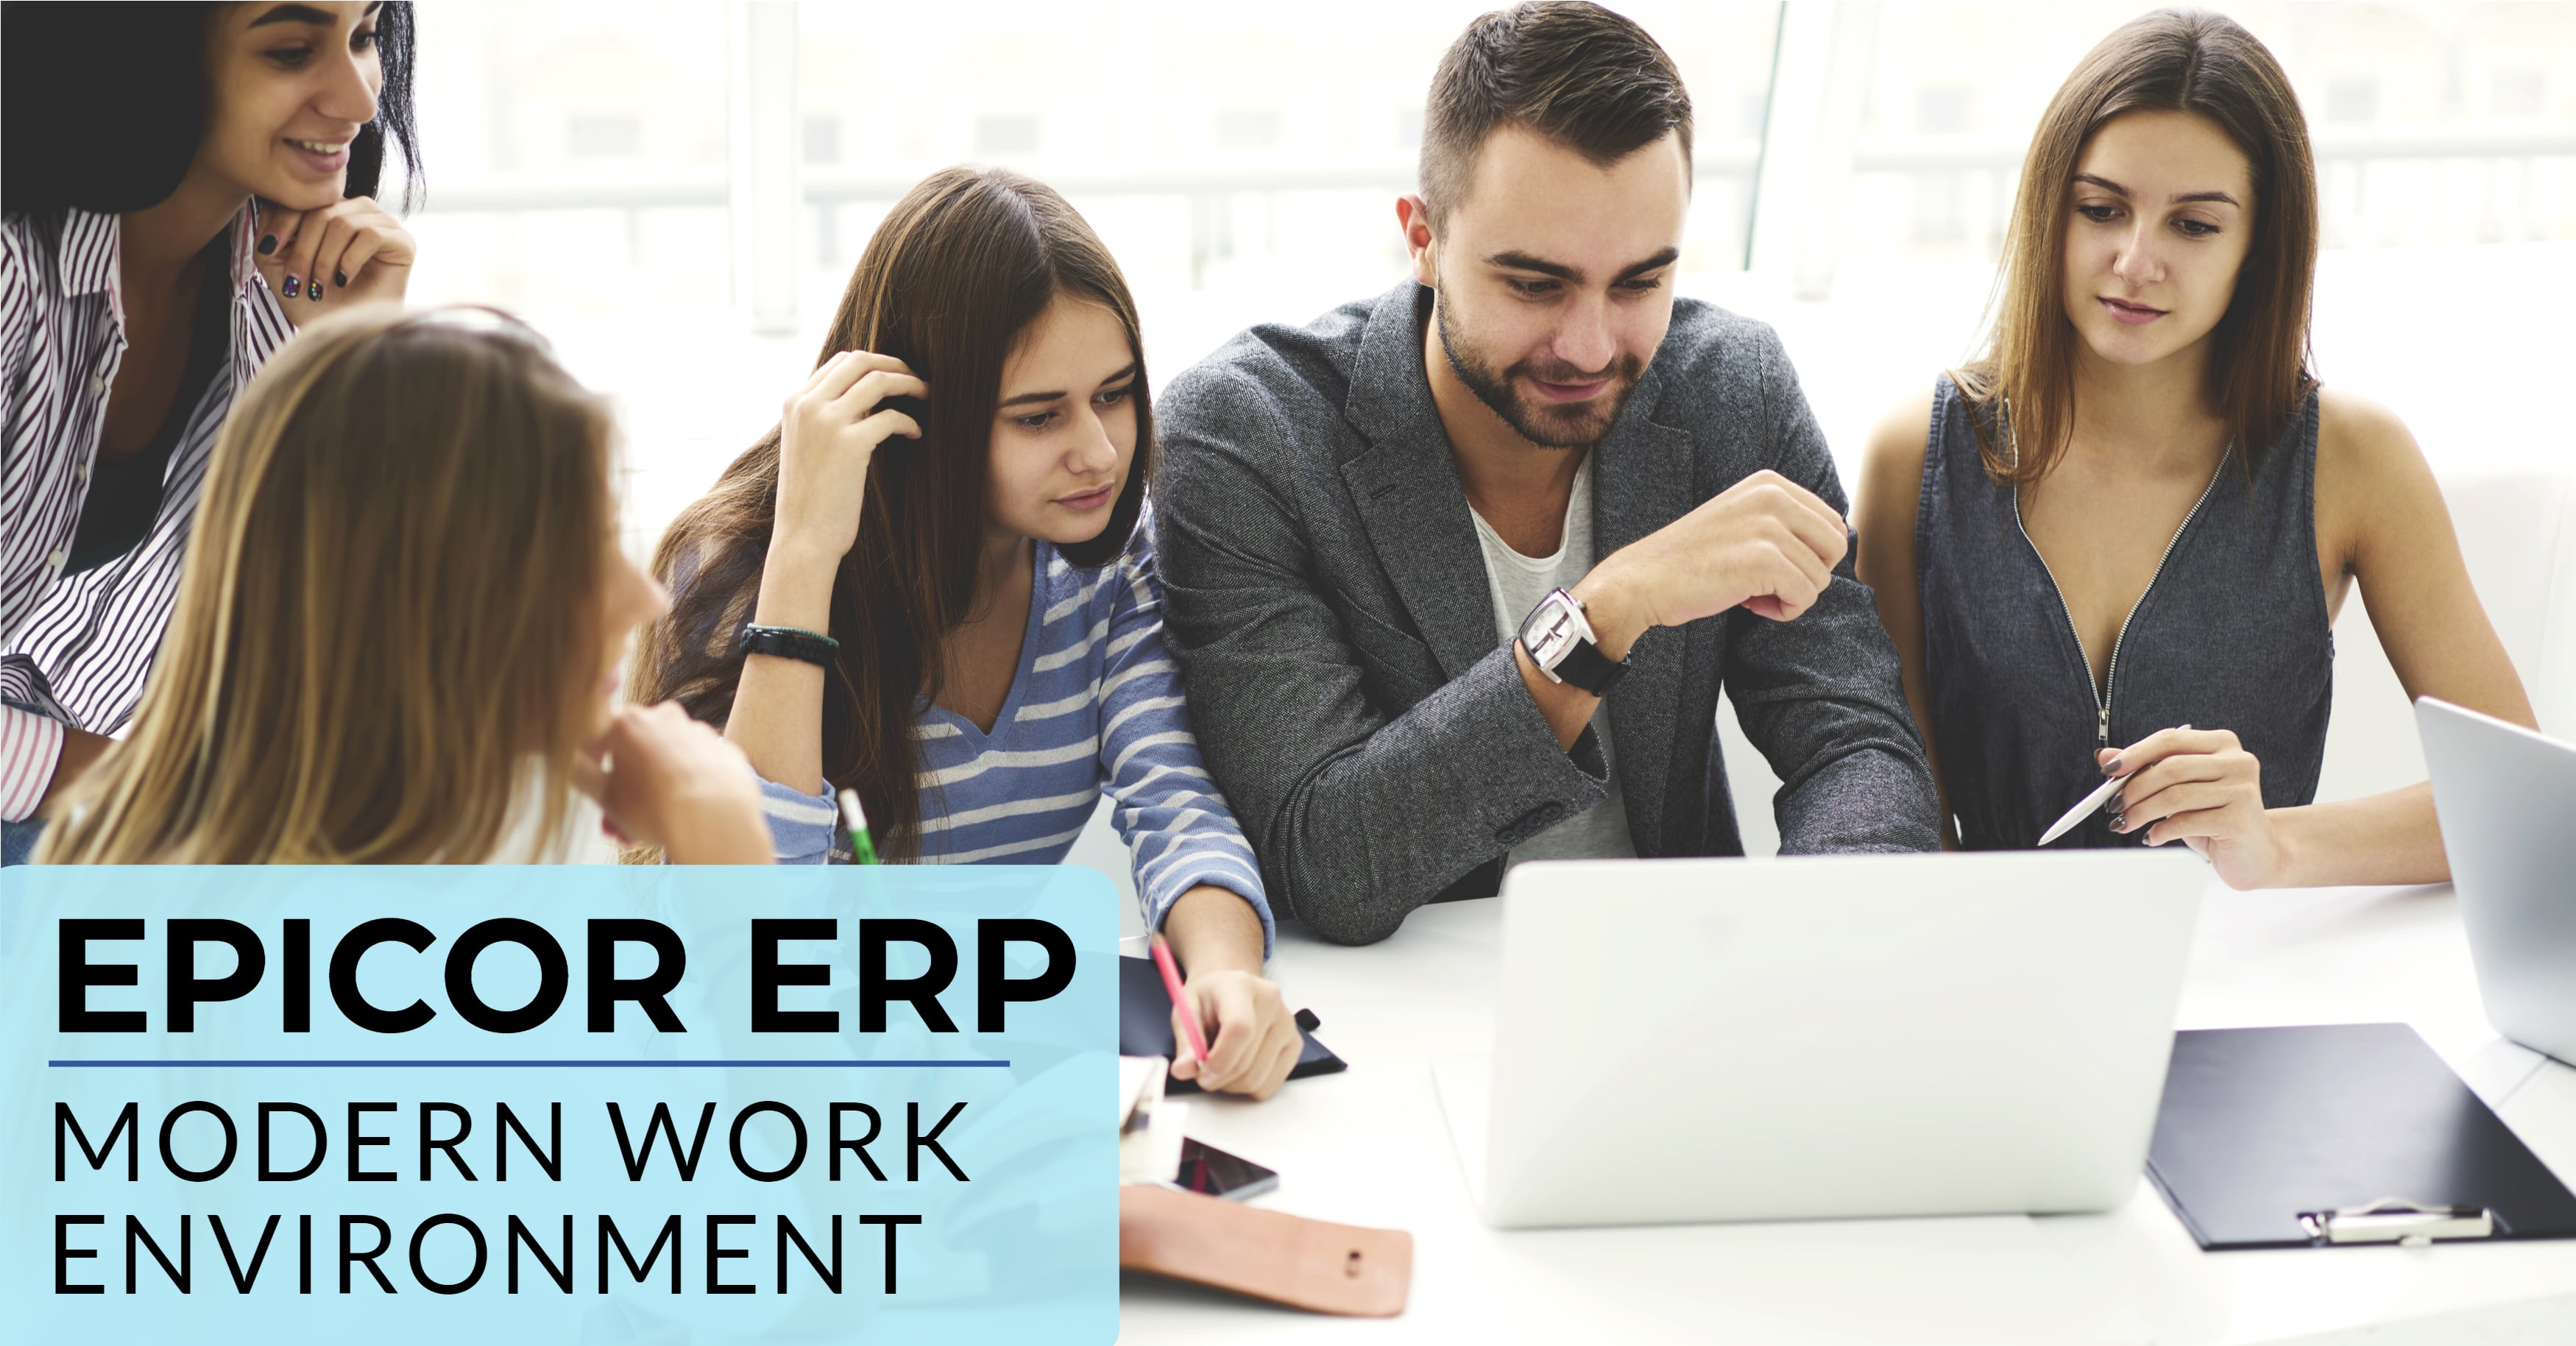 How Epicor ERP Appeals to the Millennial Workforce